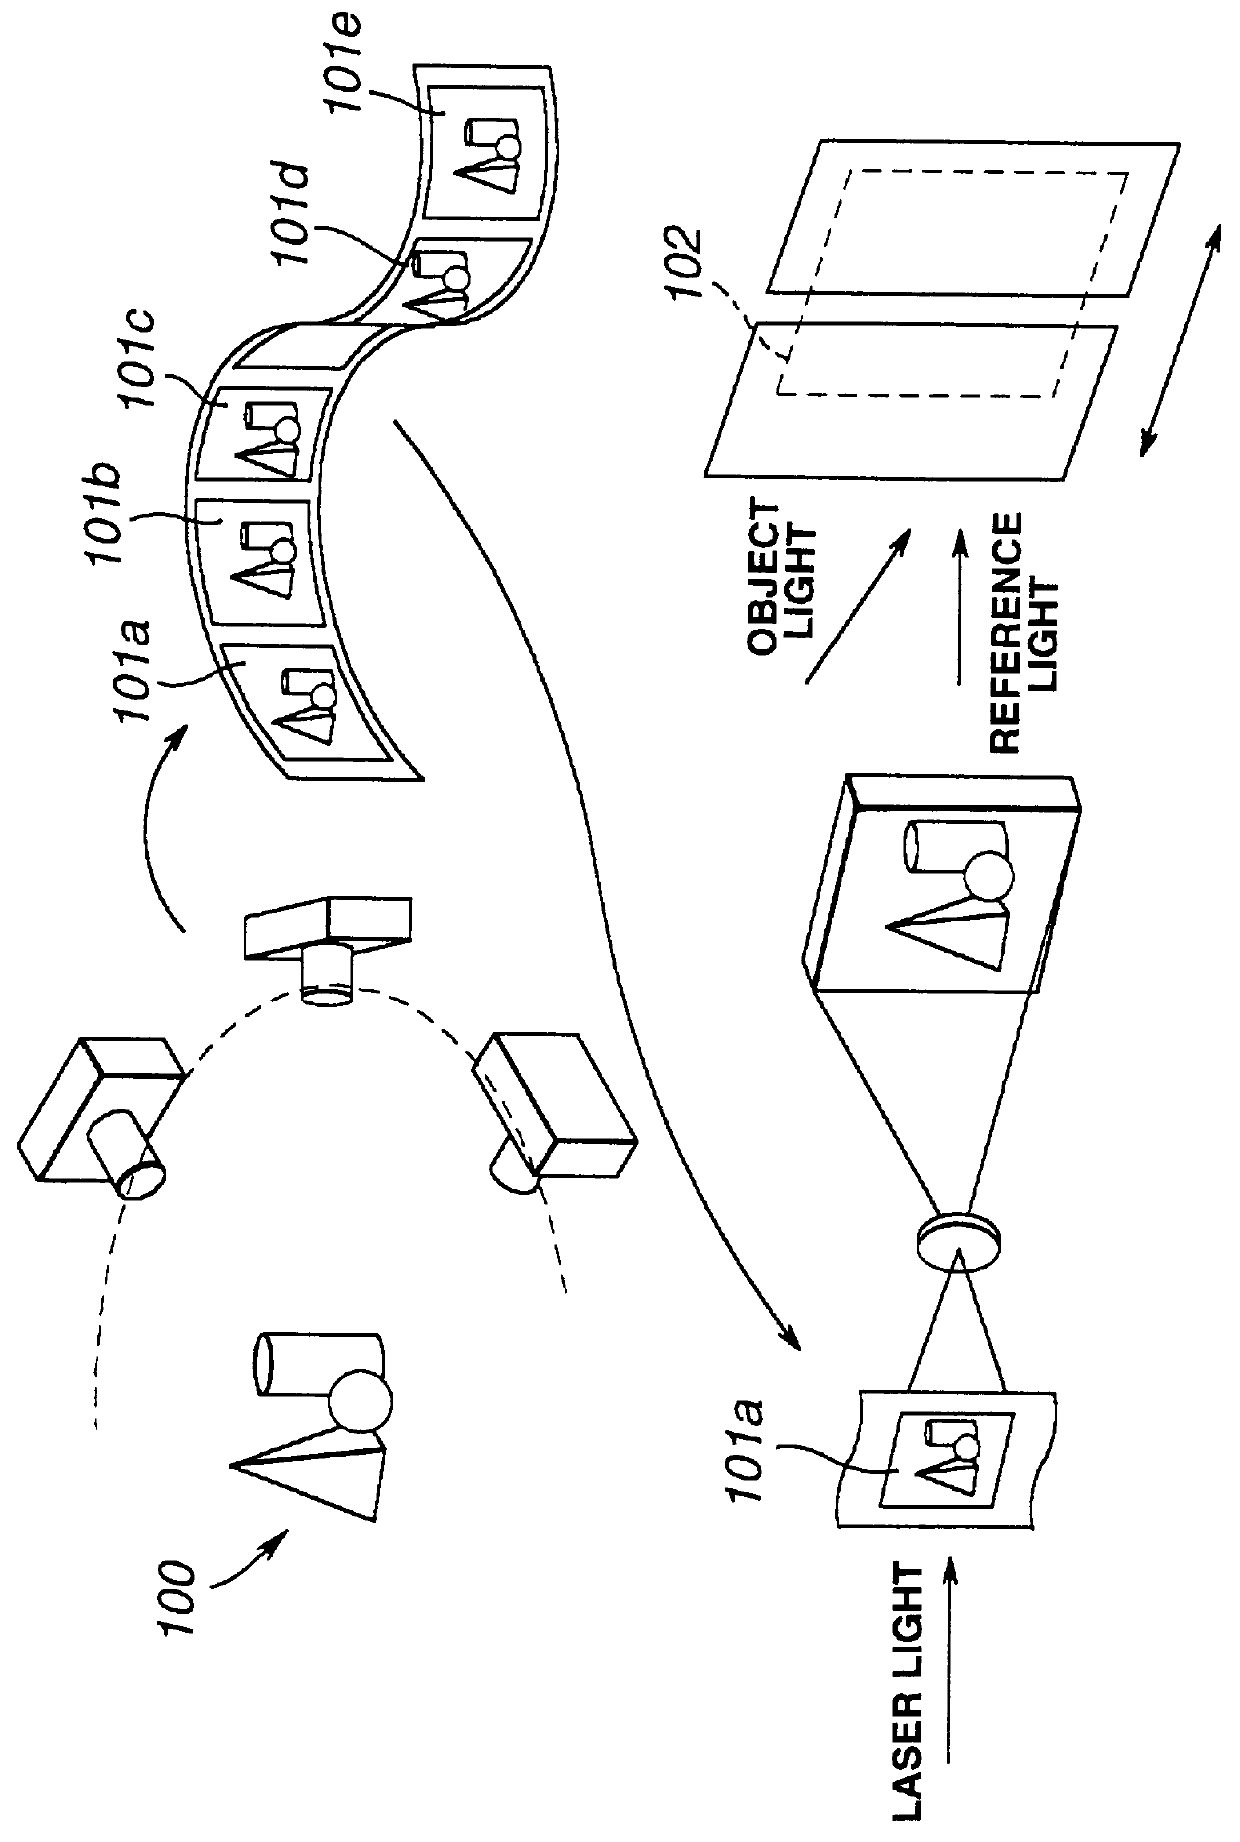 Image reproducing method and apparatus